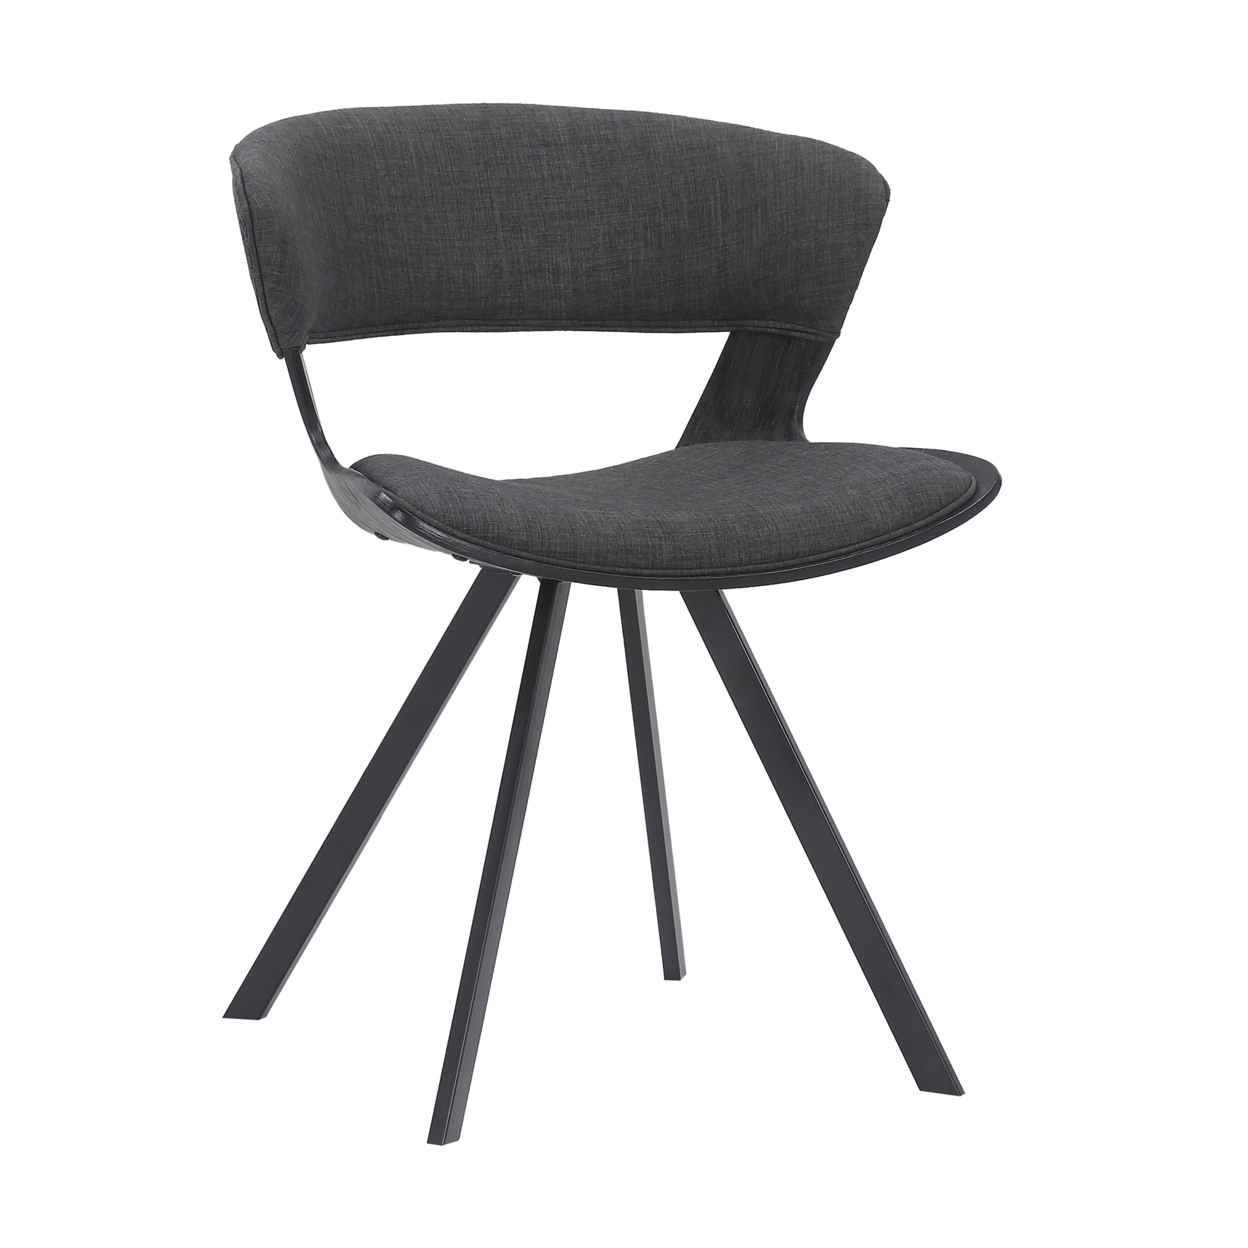 18 Inches Curved Padded Dining Chair With Angled Legs, Black- Saltoro Sherpi